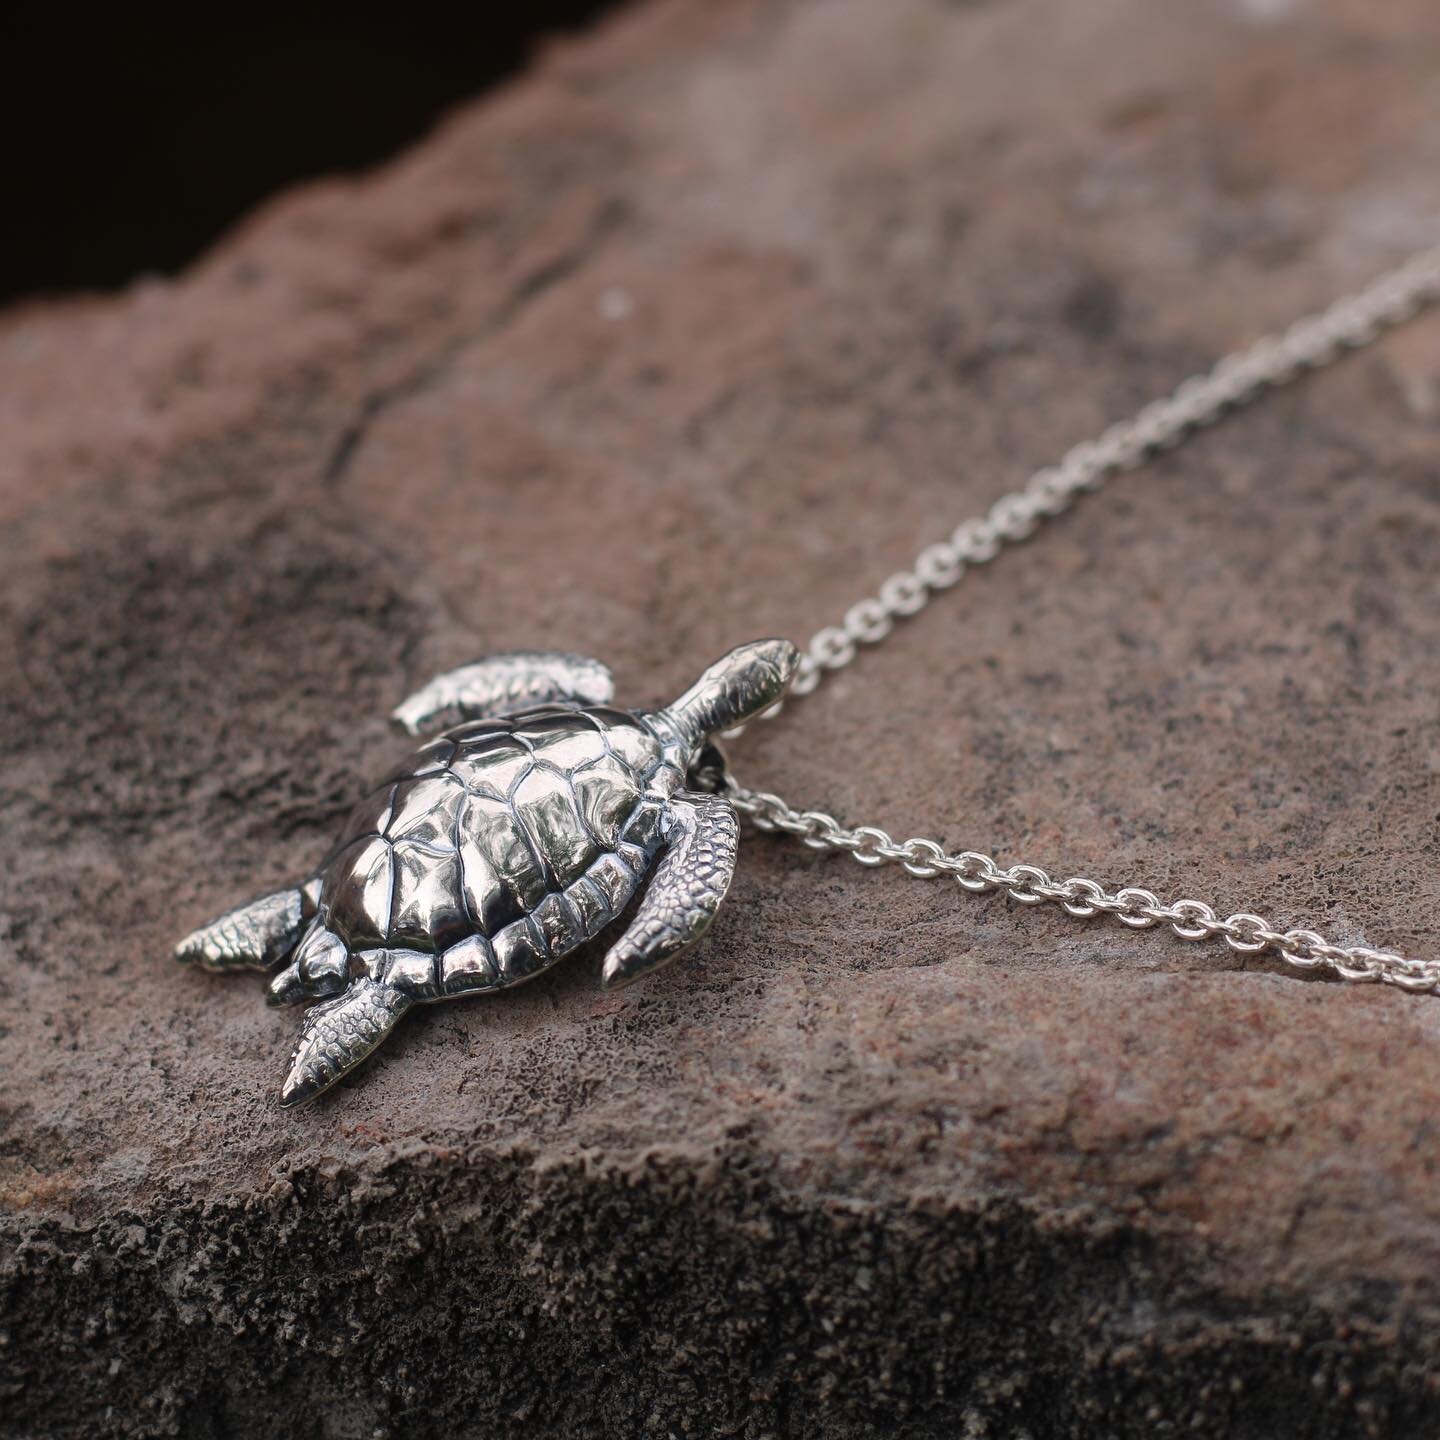 It&rsquo;s the details for us&hellip; Tap to shop our Turtle Pendant. 
&bull;
&bull;
&bull;
&bull;
#Kabana925 #Kabana #KabanaInc #KabanaJewelry #SterlingSilver #925Sterling #SterlingSilverJewelry #TurtleJewelry #TurtlePendant #TurtleNecklace #Southwe